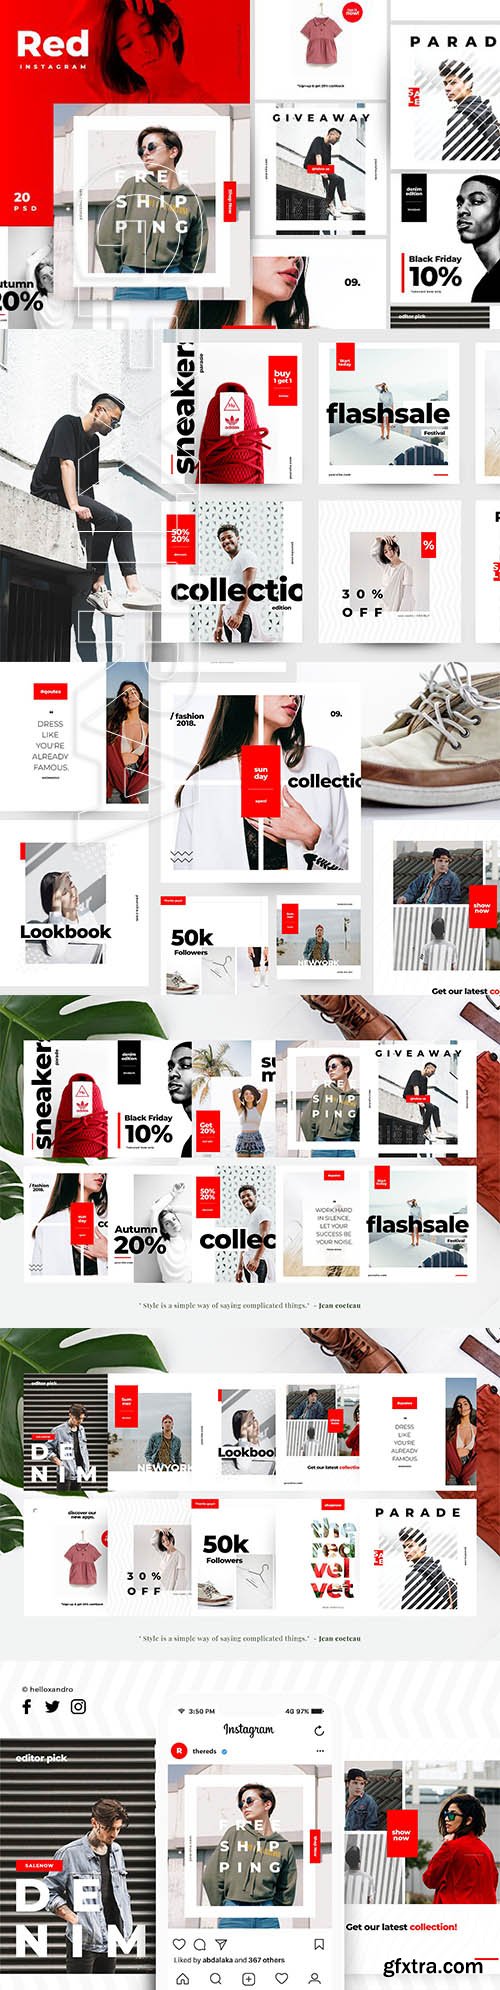 CreativeMarket - The Red - Instagram pack 2927900